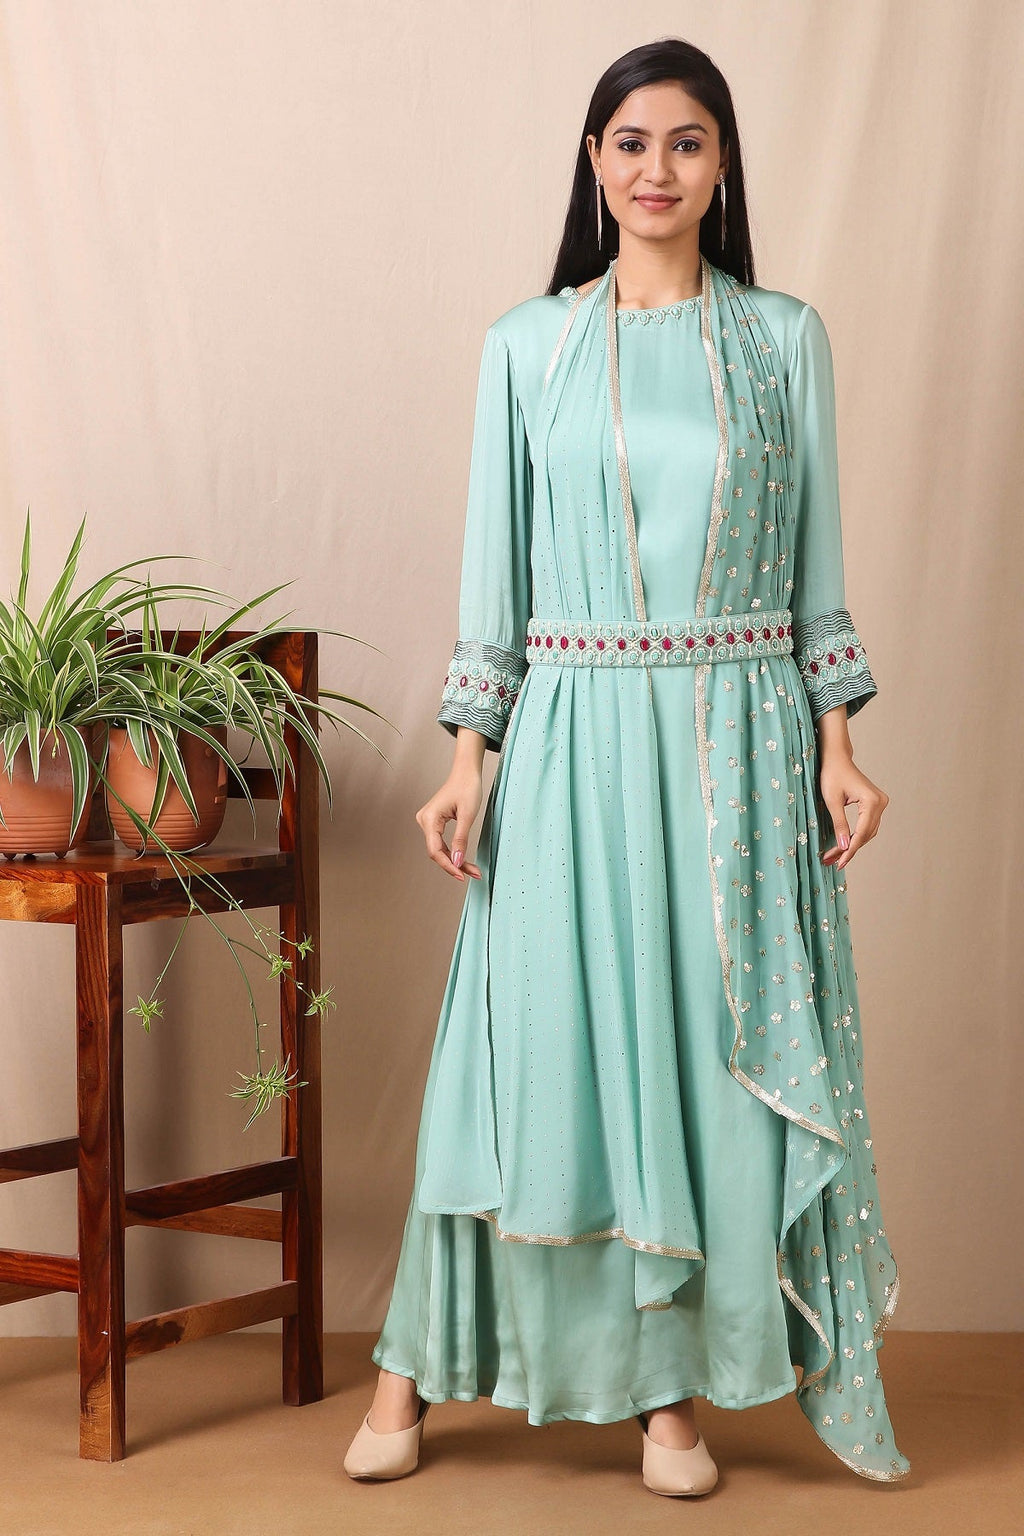 Shop this gorgeous bamberg satin embroidered dress in teel blue color with georgette dupatta featuring a beautiful neckline , belt and cuffs with cutdana and ruby, emerald colored stones, thread embroidery work and dupatta. This beautiful satin material outfit showcases beautiful sleeves with sequin embroidery work and stone work on it and dupatta. Style this set with a pair of diamond earrings and solid pumps to finish the look from Pure Elegance Indian clothing store in USA online now.-Full view.